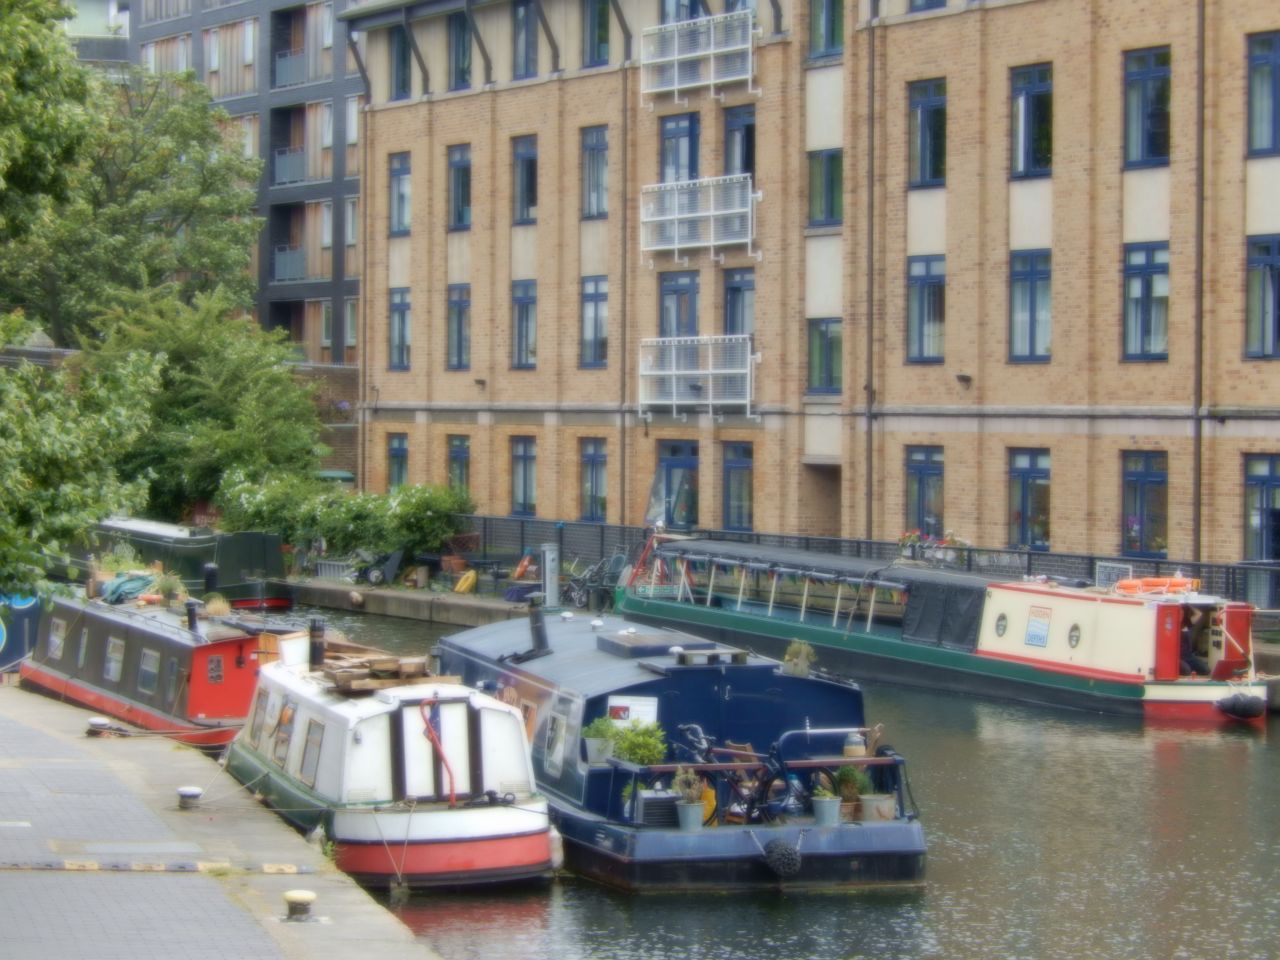 Expensive riverside developments, and an increase in high value tourist boats, have stoked fears among boaters that they are a low priority for the canal authorities, and could even be evicted.  